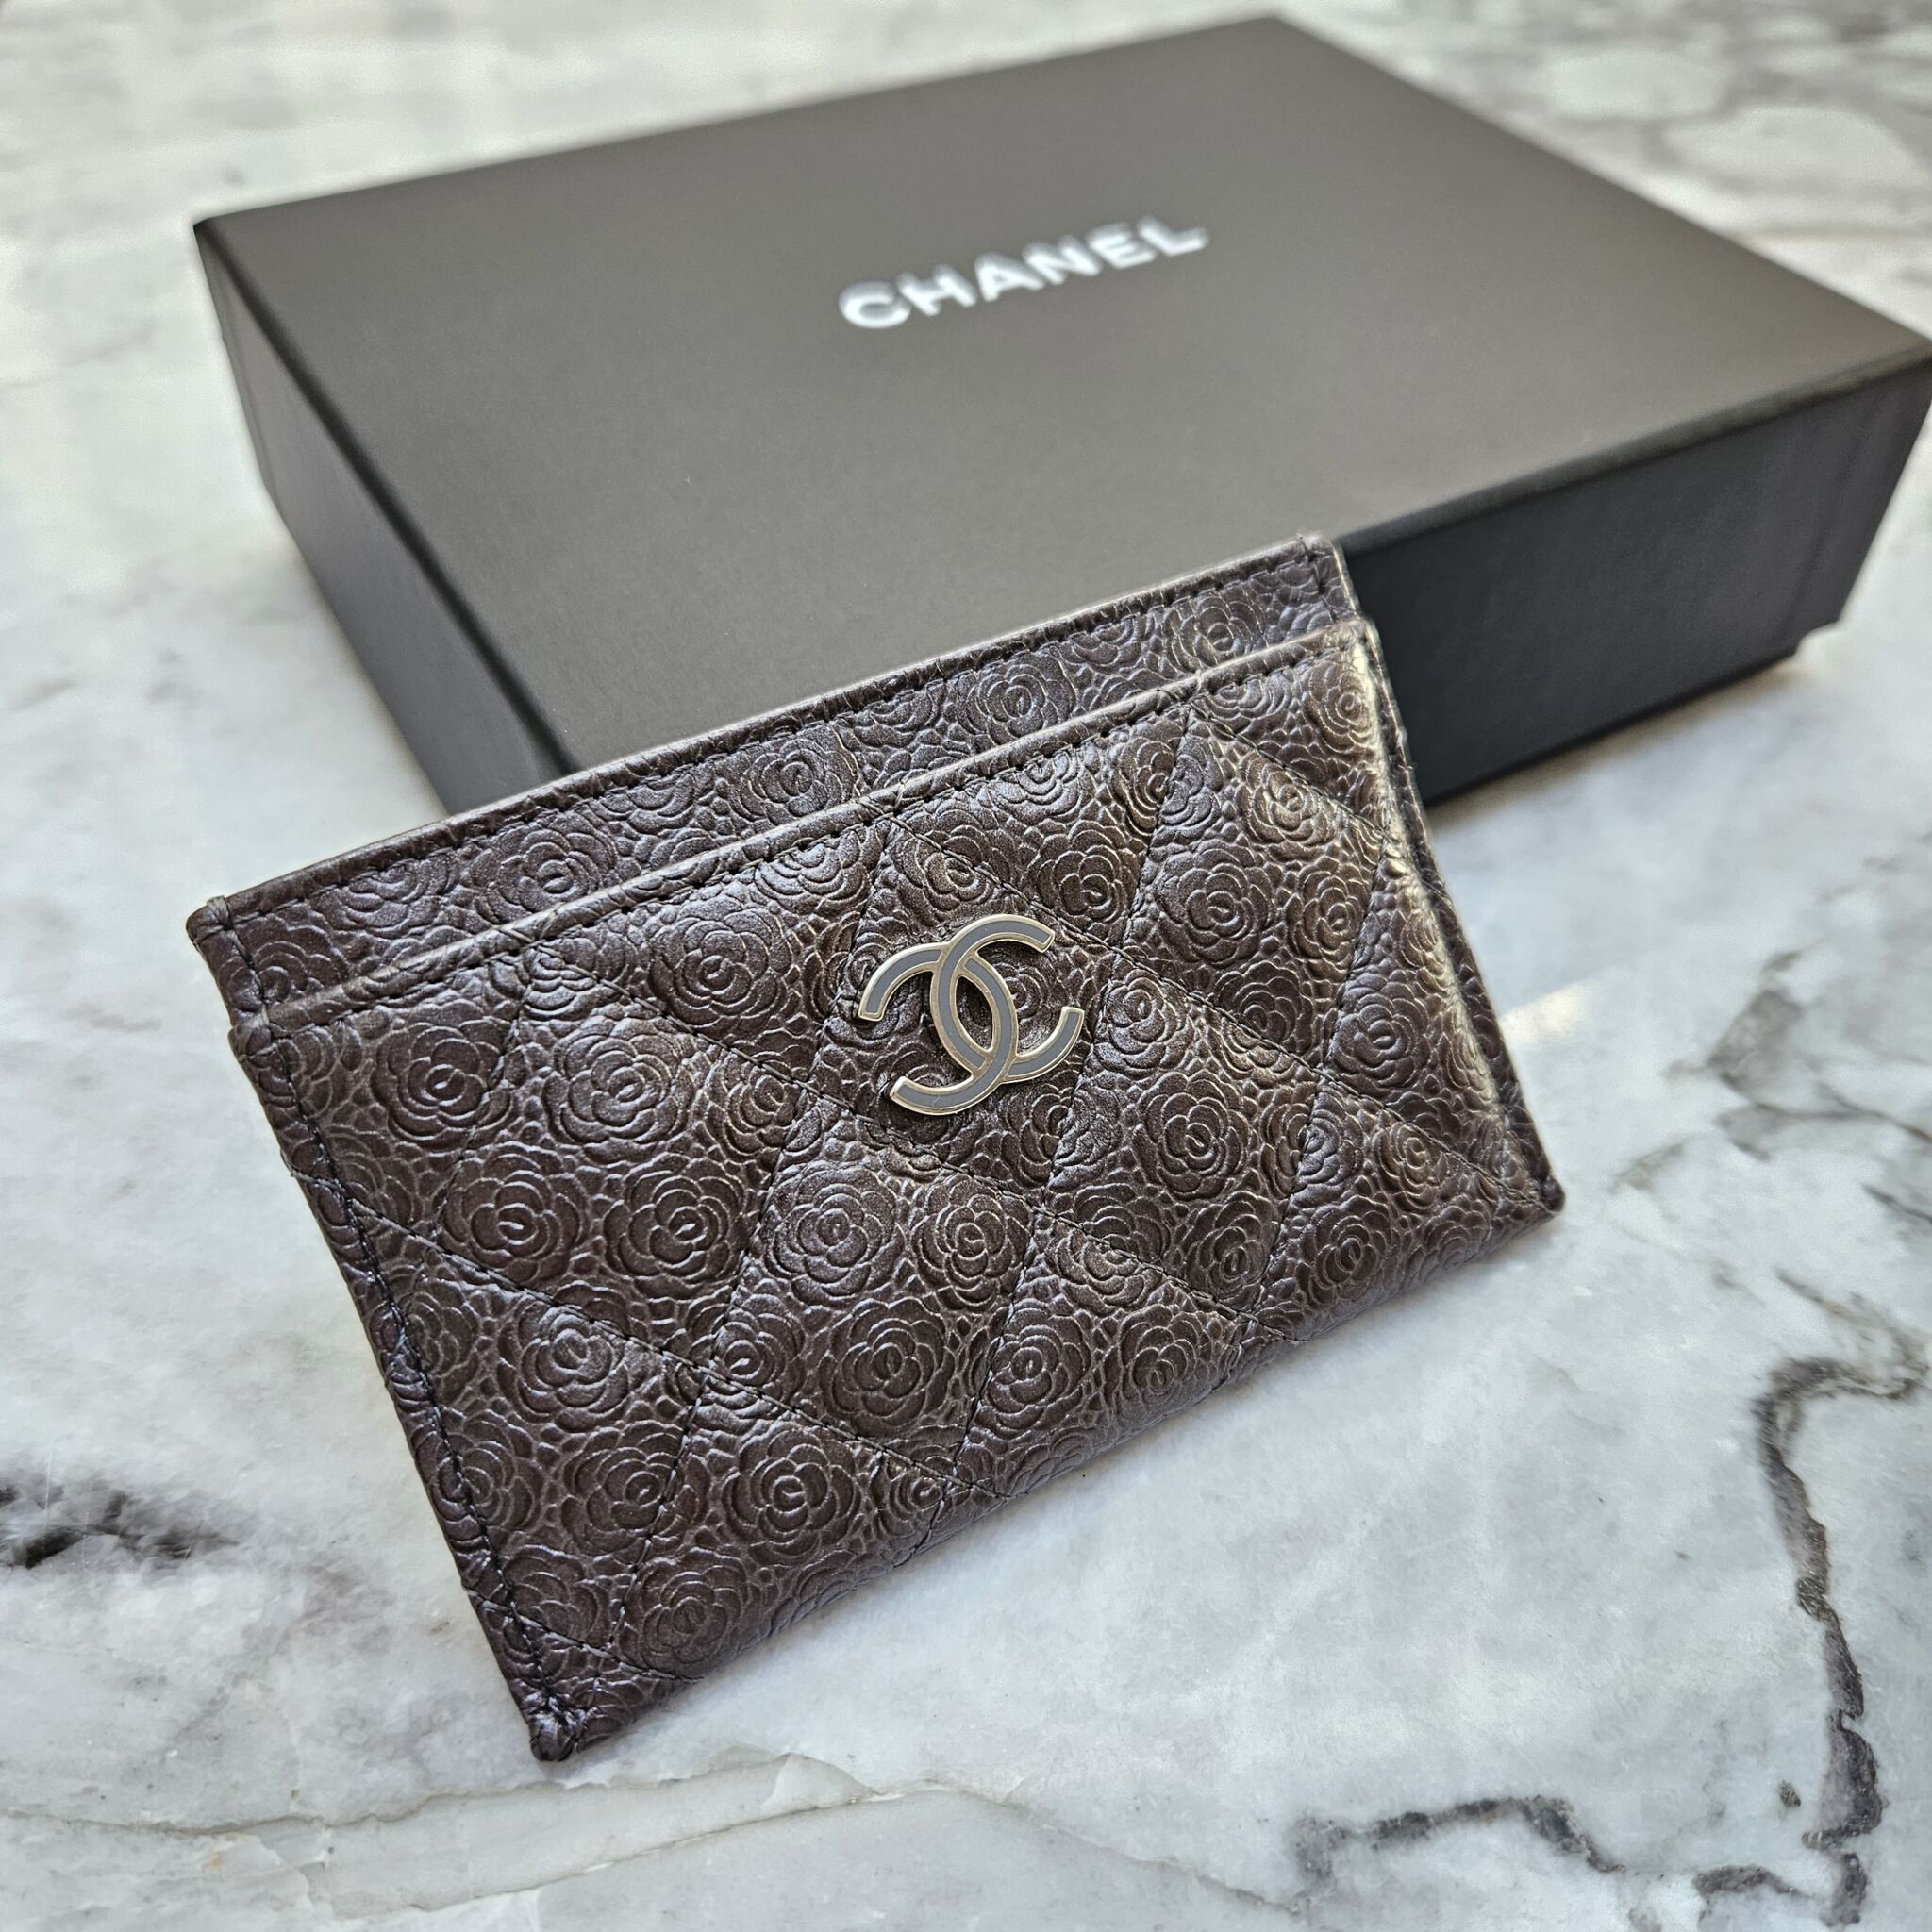 Chanel Classic Cardholder UNBOXING! 